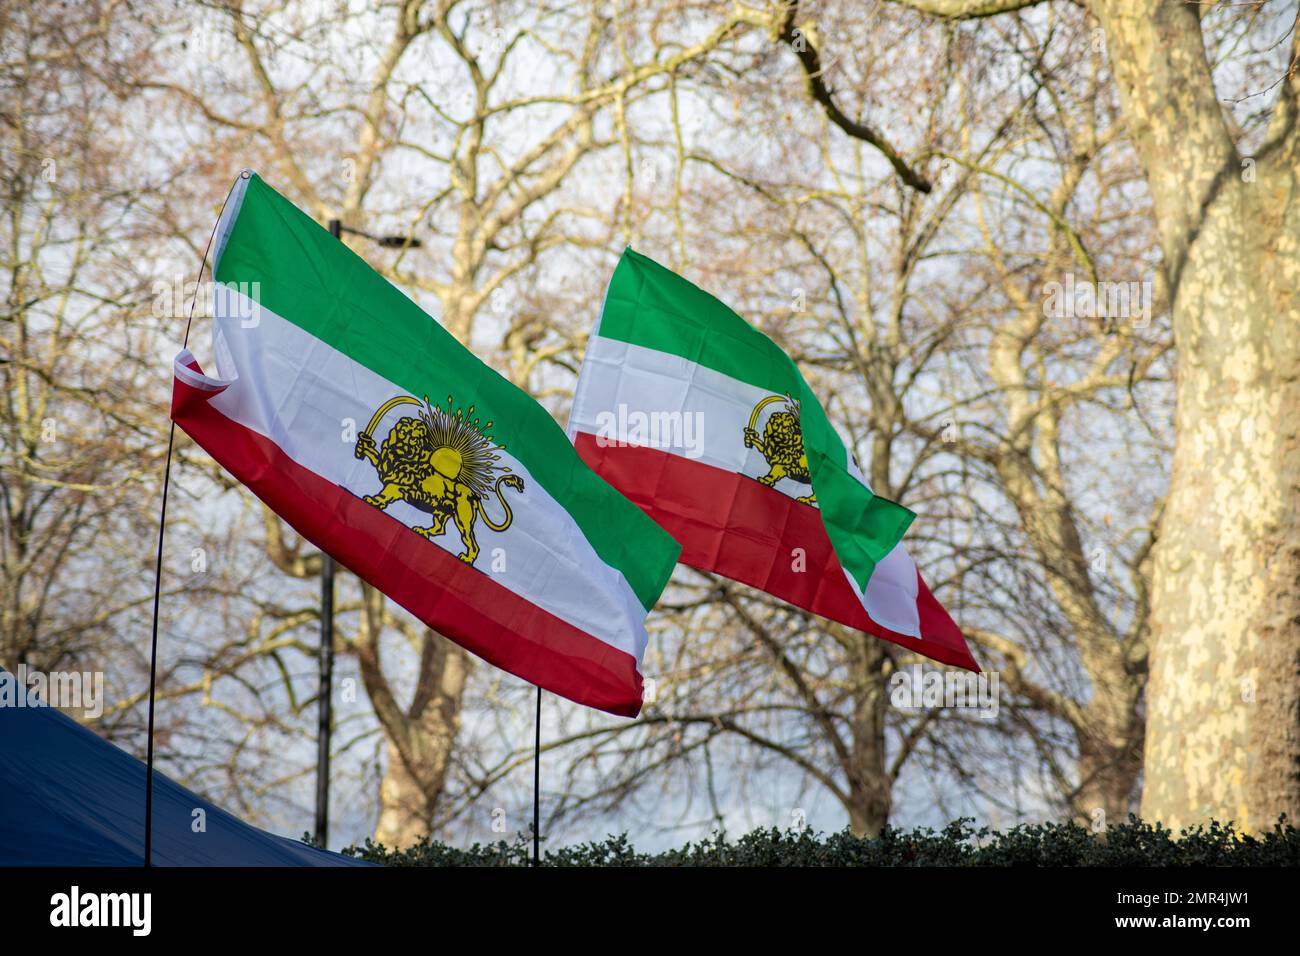 London, UK – 31 Jan. 2023: Iranian Pre-revolution (1979) flag—known as Shir-o-Khorshid flag—flying in front of Islamic Republic of Iran’s Embassy as protesters are chanting slogans against the Islamic Regime of Iran. Credit: Sinai Noor/Alamy Live News Stock Photo